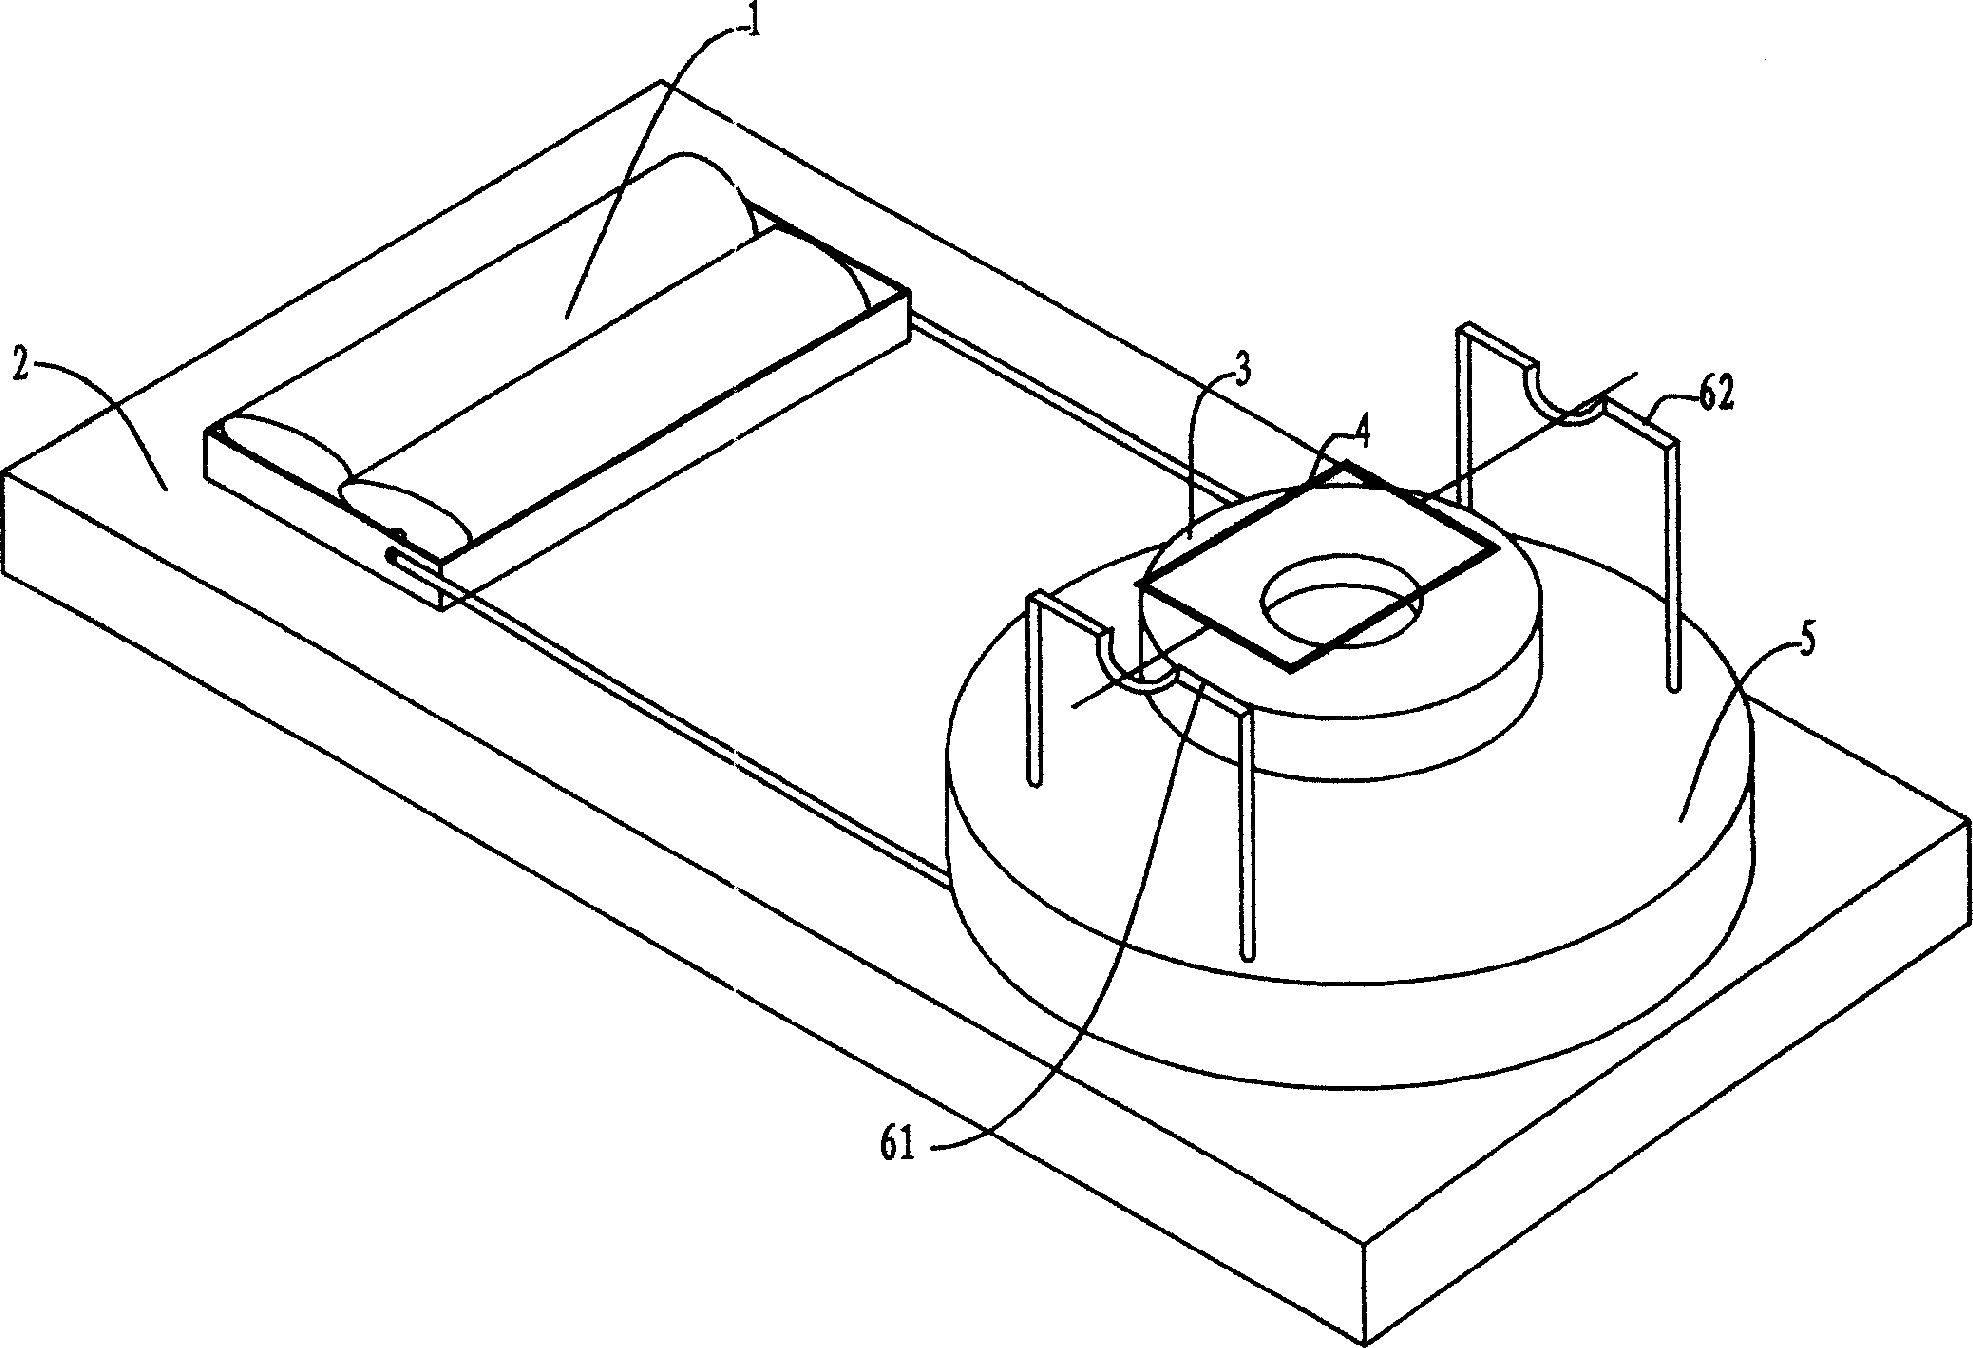 Electromagnetic induction demonstration device